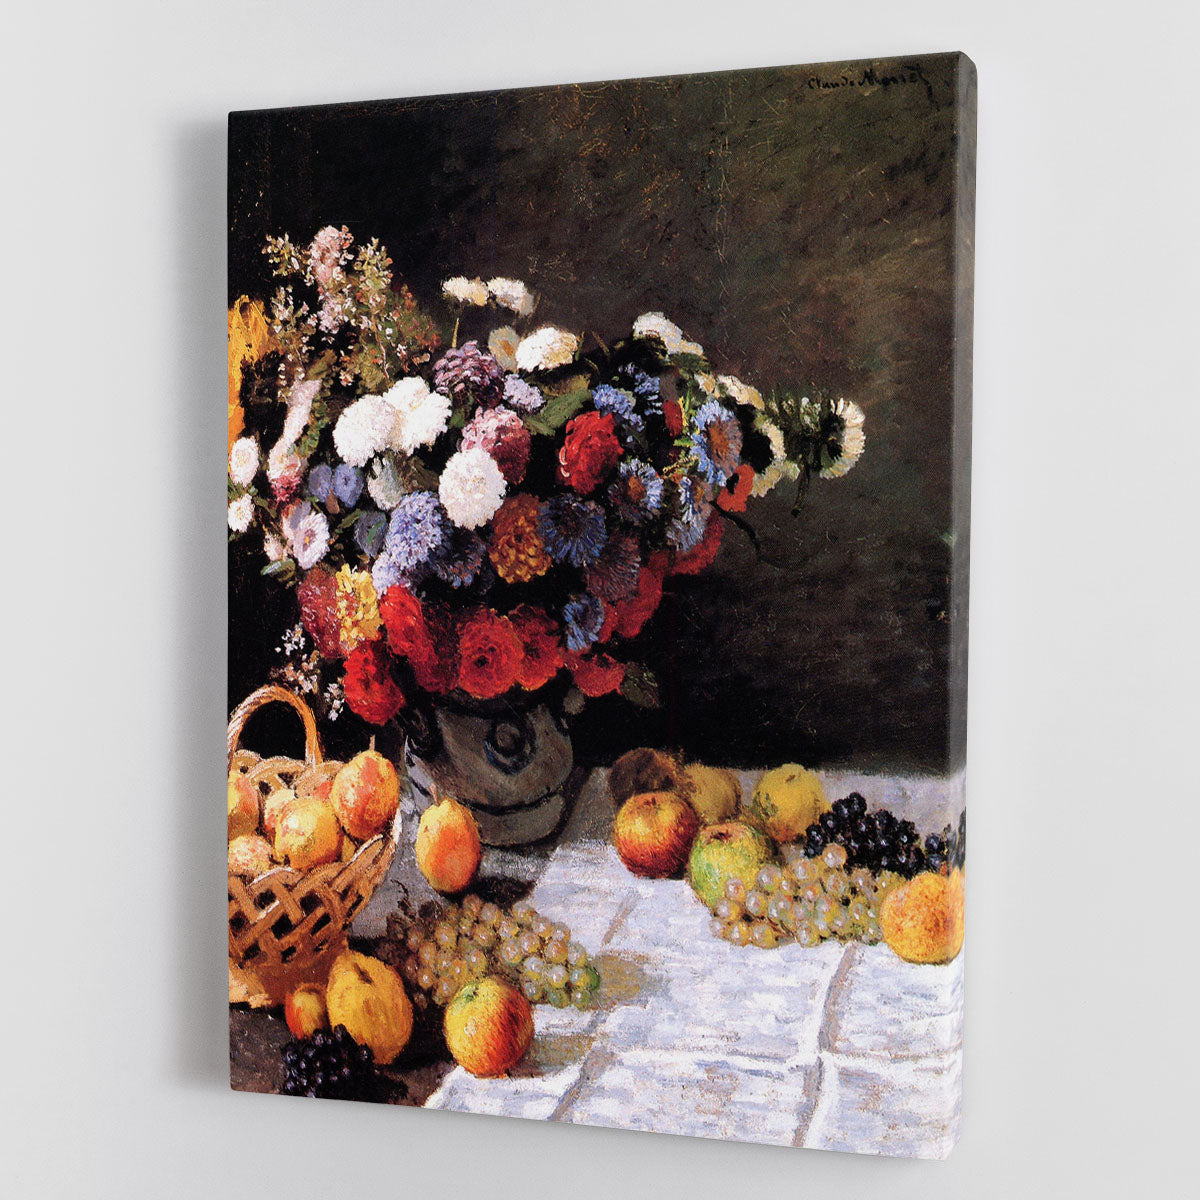 Flowers and Fruits by Monet Canvas Print or Poster - Canvas Art Rocks - 1